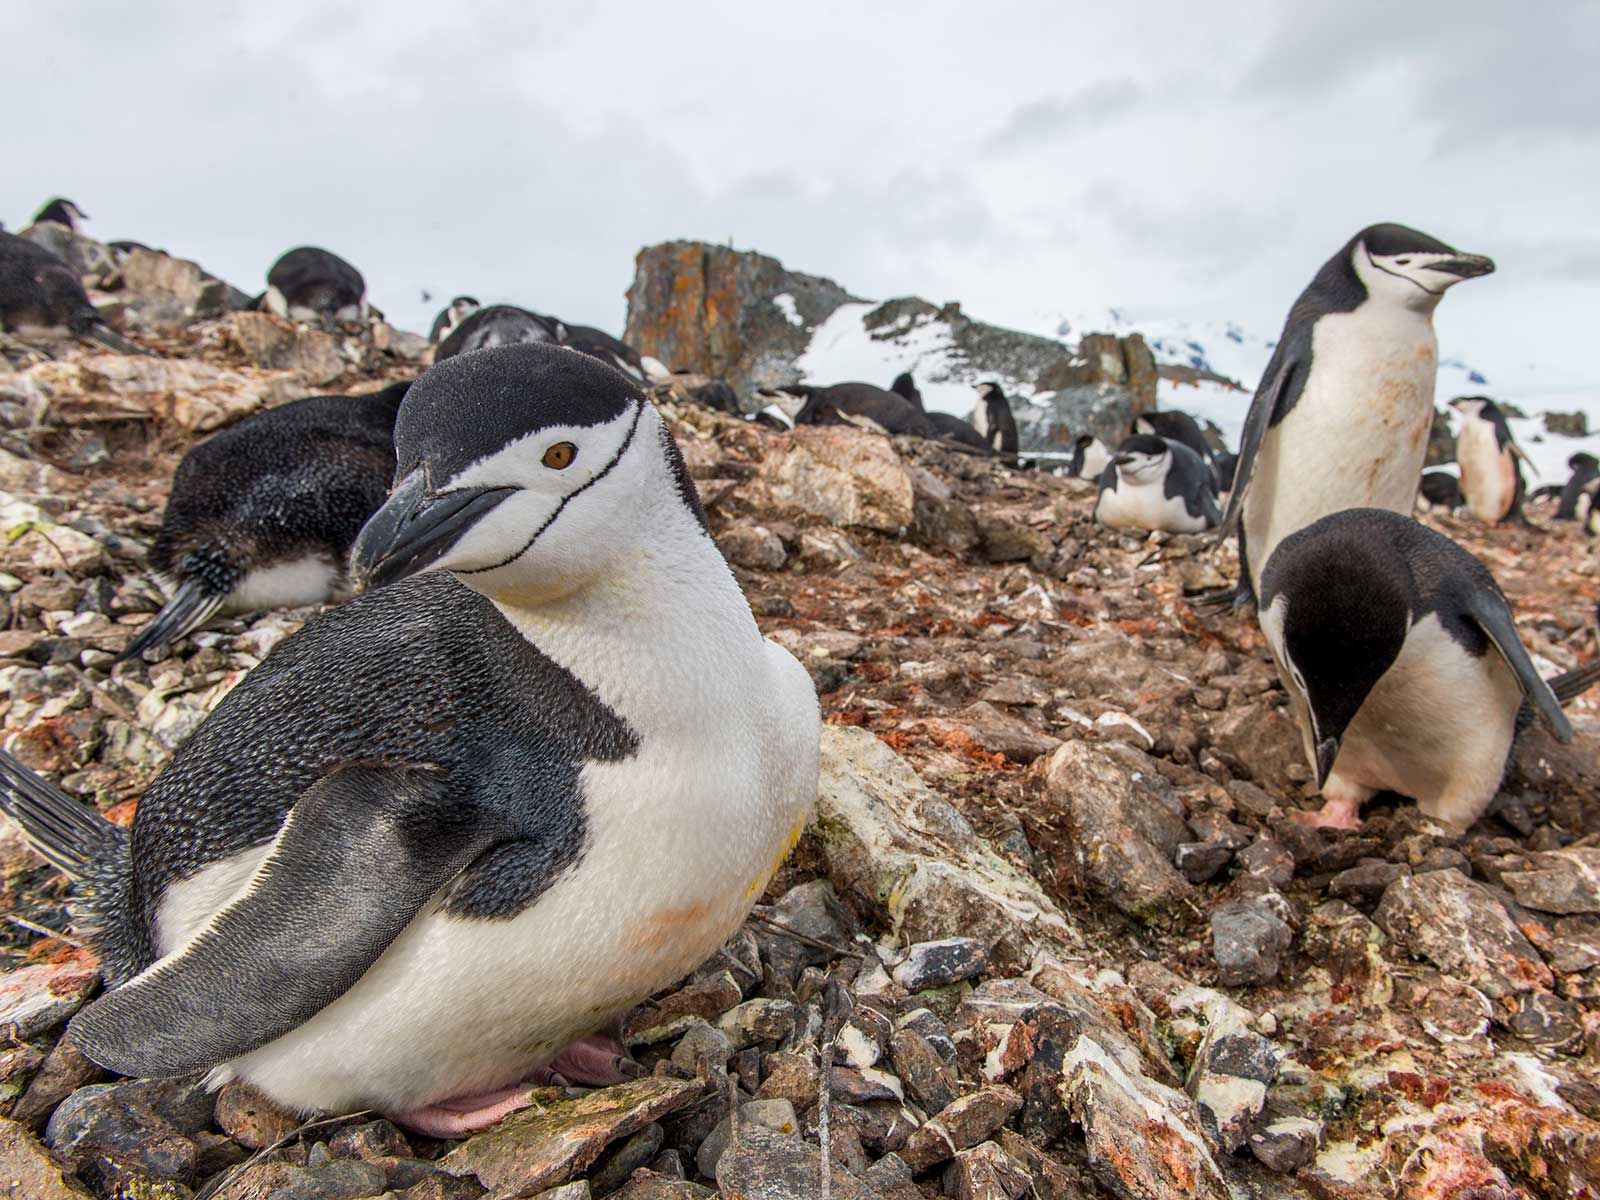 Chinstrap Penguins Sleep Over 10,000 Times a Day—for Just Four Seconds at a Time